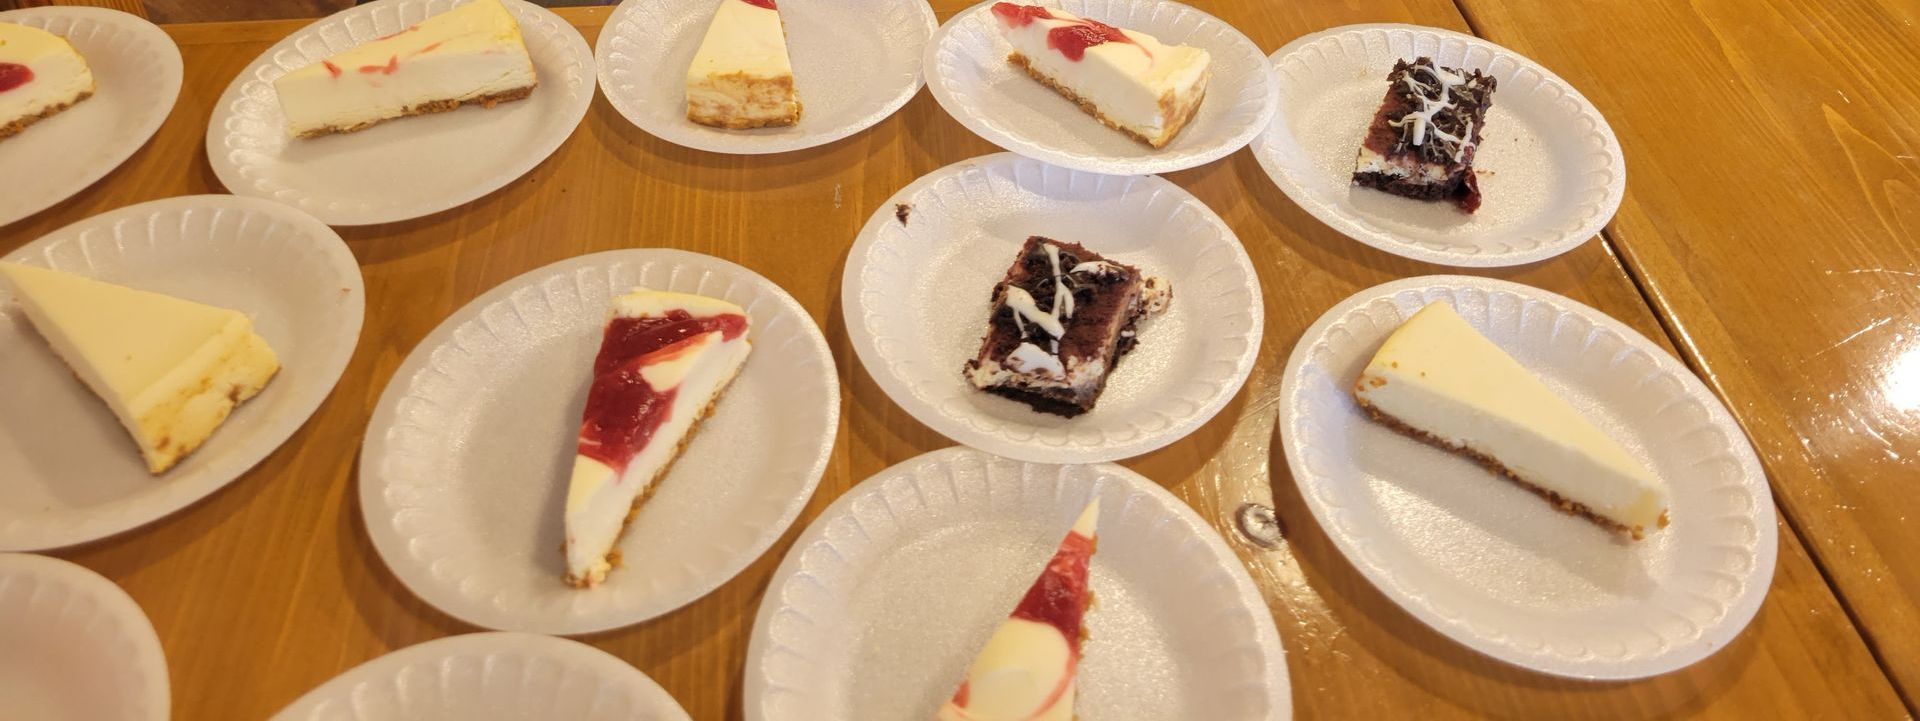 There are many different types of cheesecake on the plates.